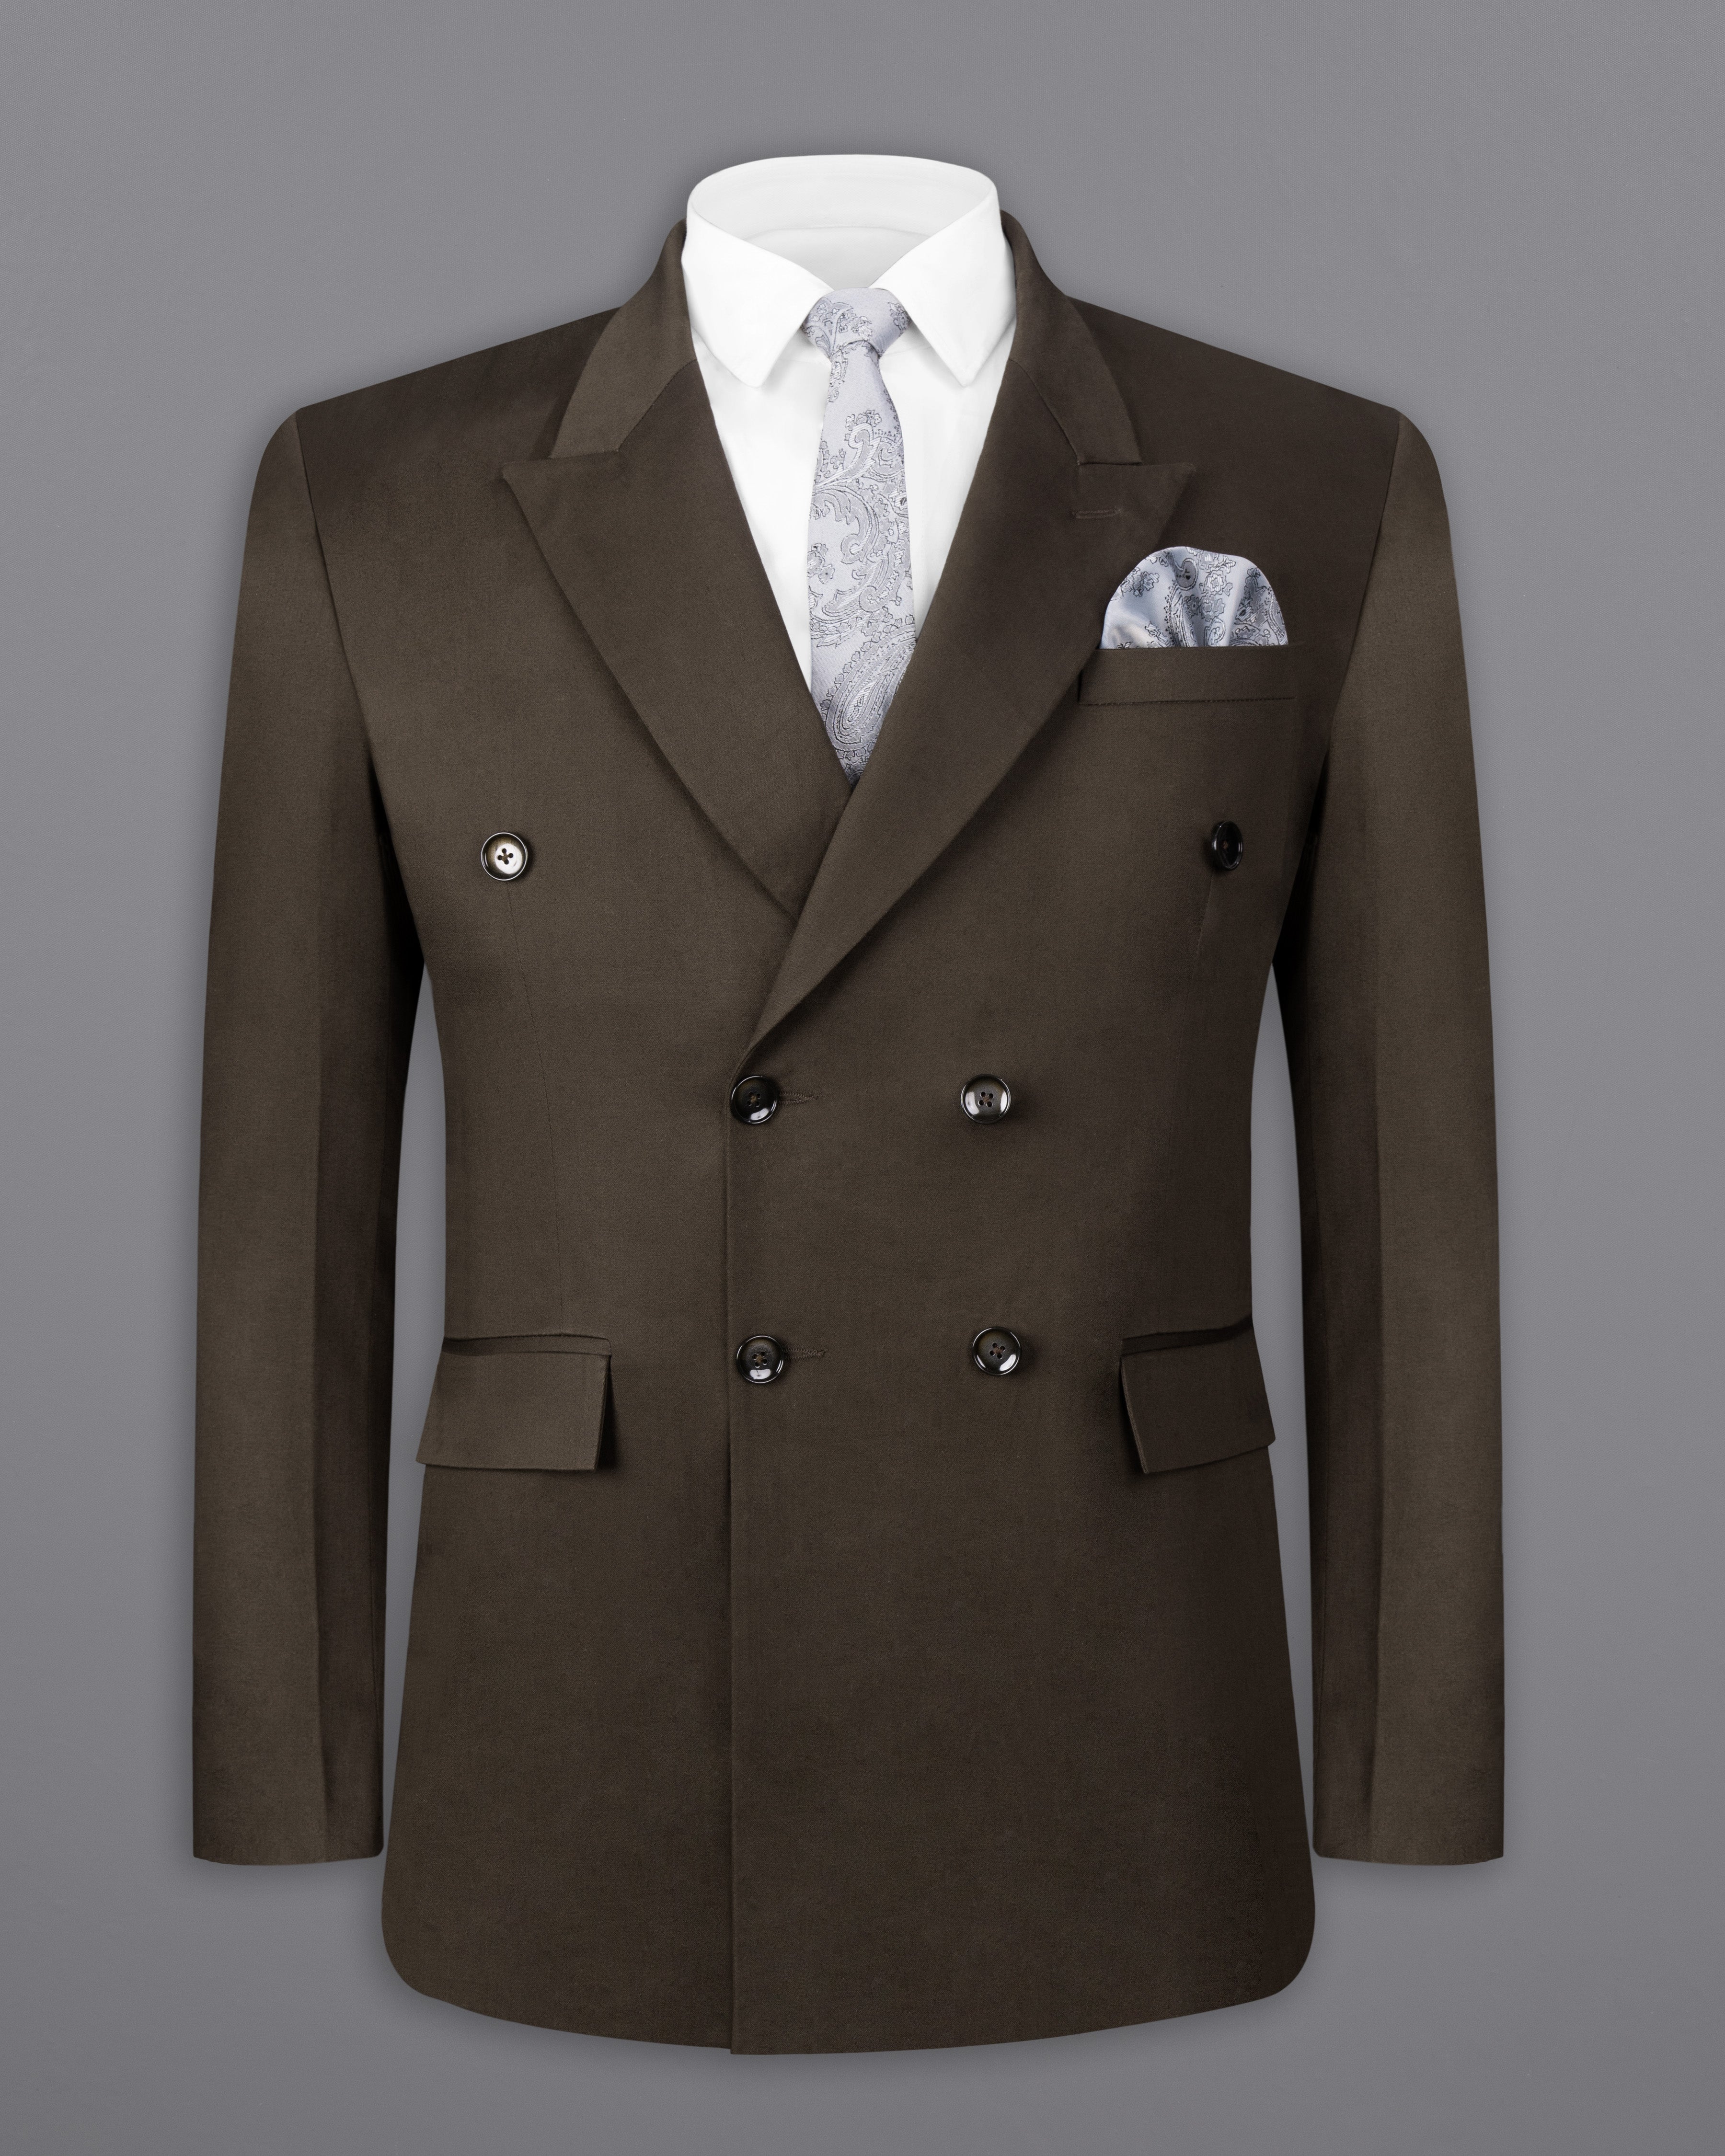 Walnut Brown Solid Stretchable Premium Cotton Double Breasted traveler Suit ST2628-DB-36,ST2628-DB-38,ST2628-DB-40,ST2628-DB-42,ST2628-DB-44,ST2628-DB-46,ST2628-DB-48,ST2628-DB-50,ST2628-DB-52,ST2628-DB-54,ST2628-DB-56,ST2628-DB-58,ST2628-DB-60